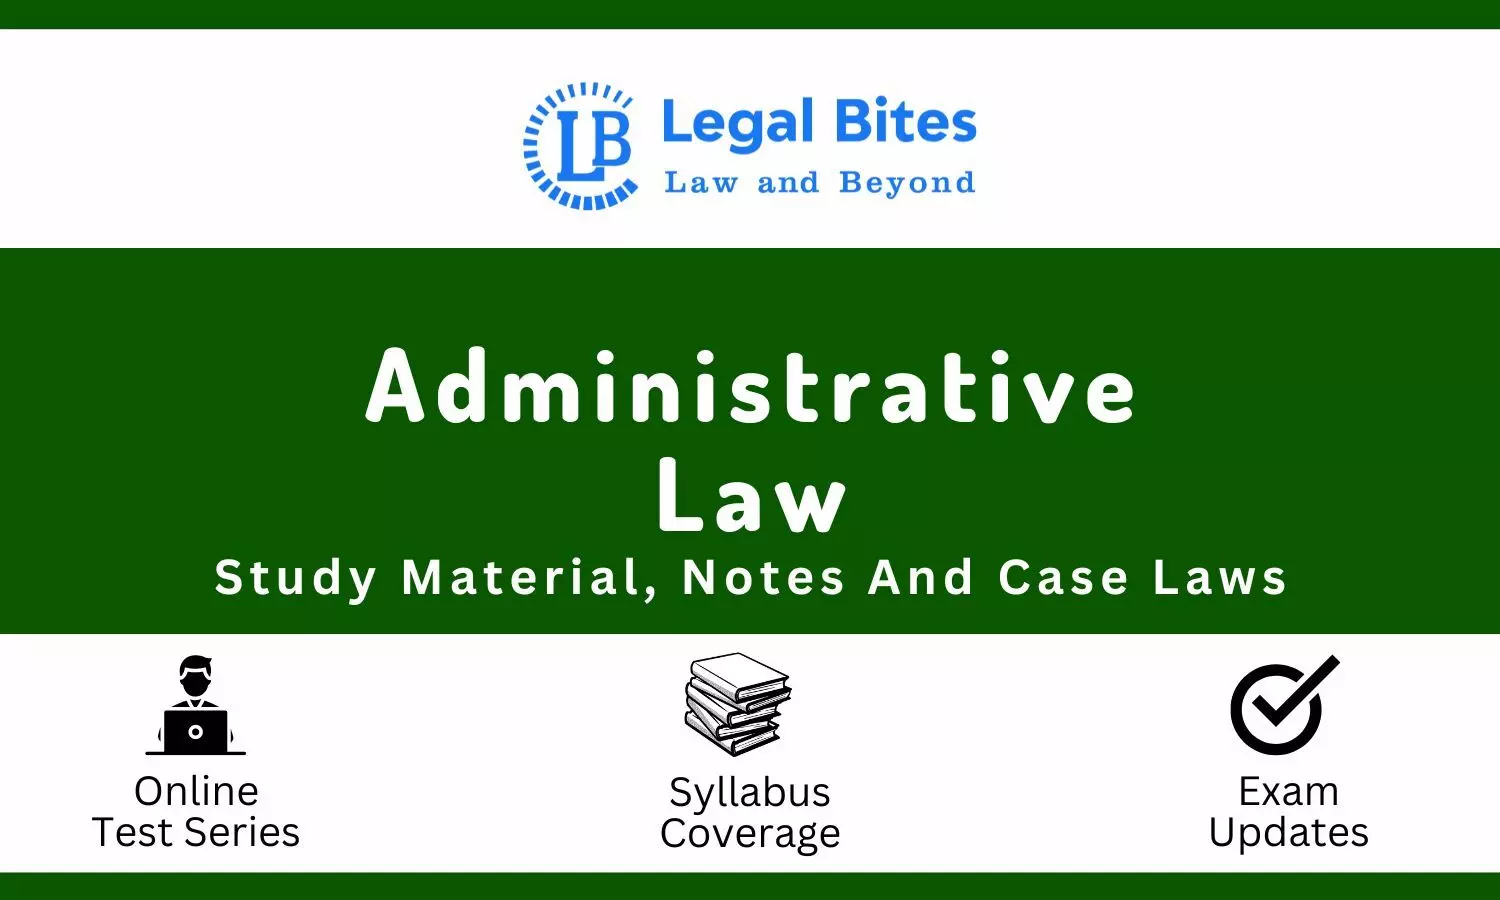 Administrative Law - Notes, Case Laws And Study Material